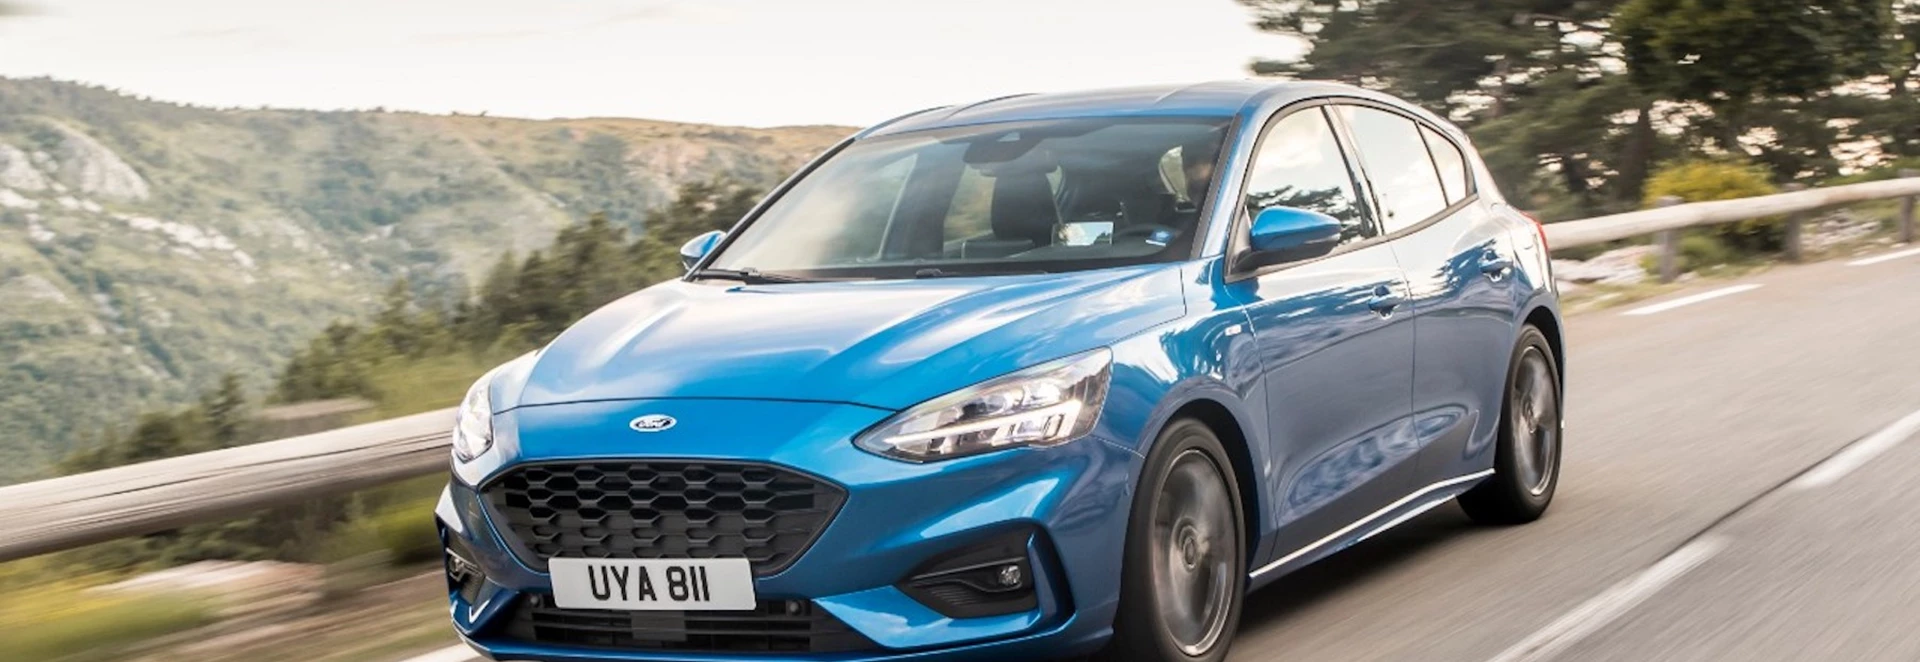 Buyer’s guide to the 2020 Ford Focus 